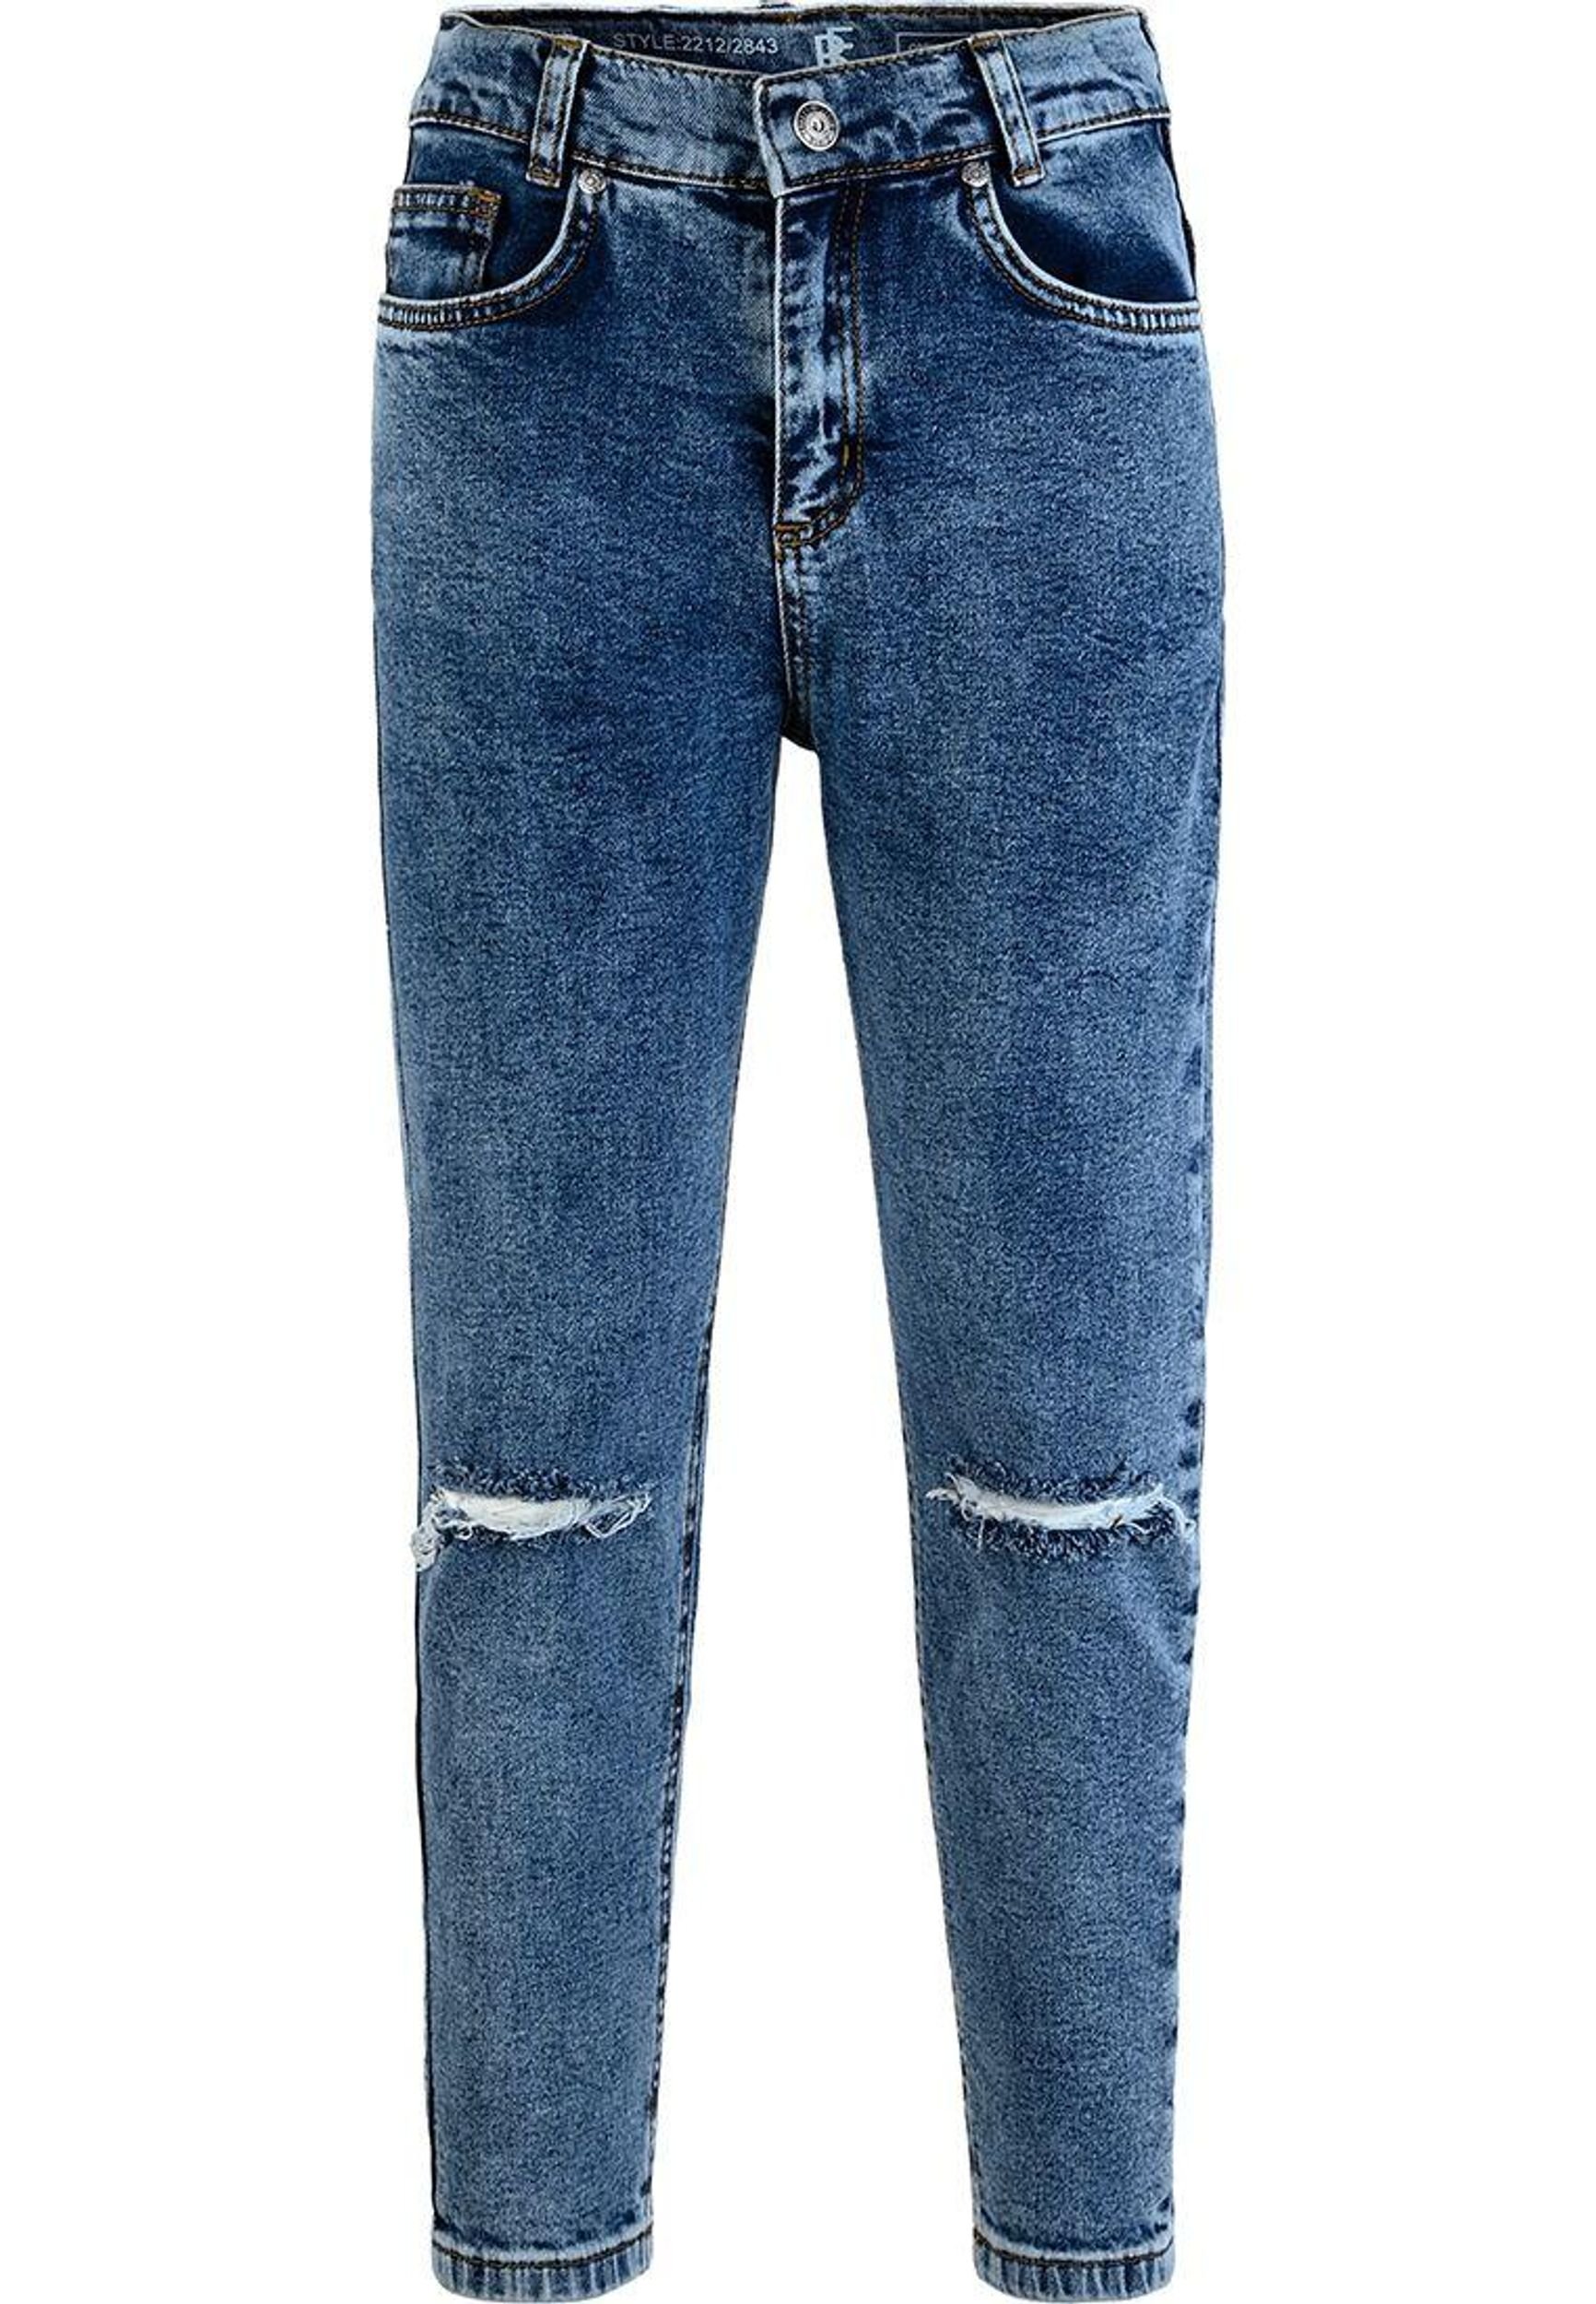 LIMITED EDITION - Jeans Relaxed Fit